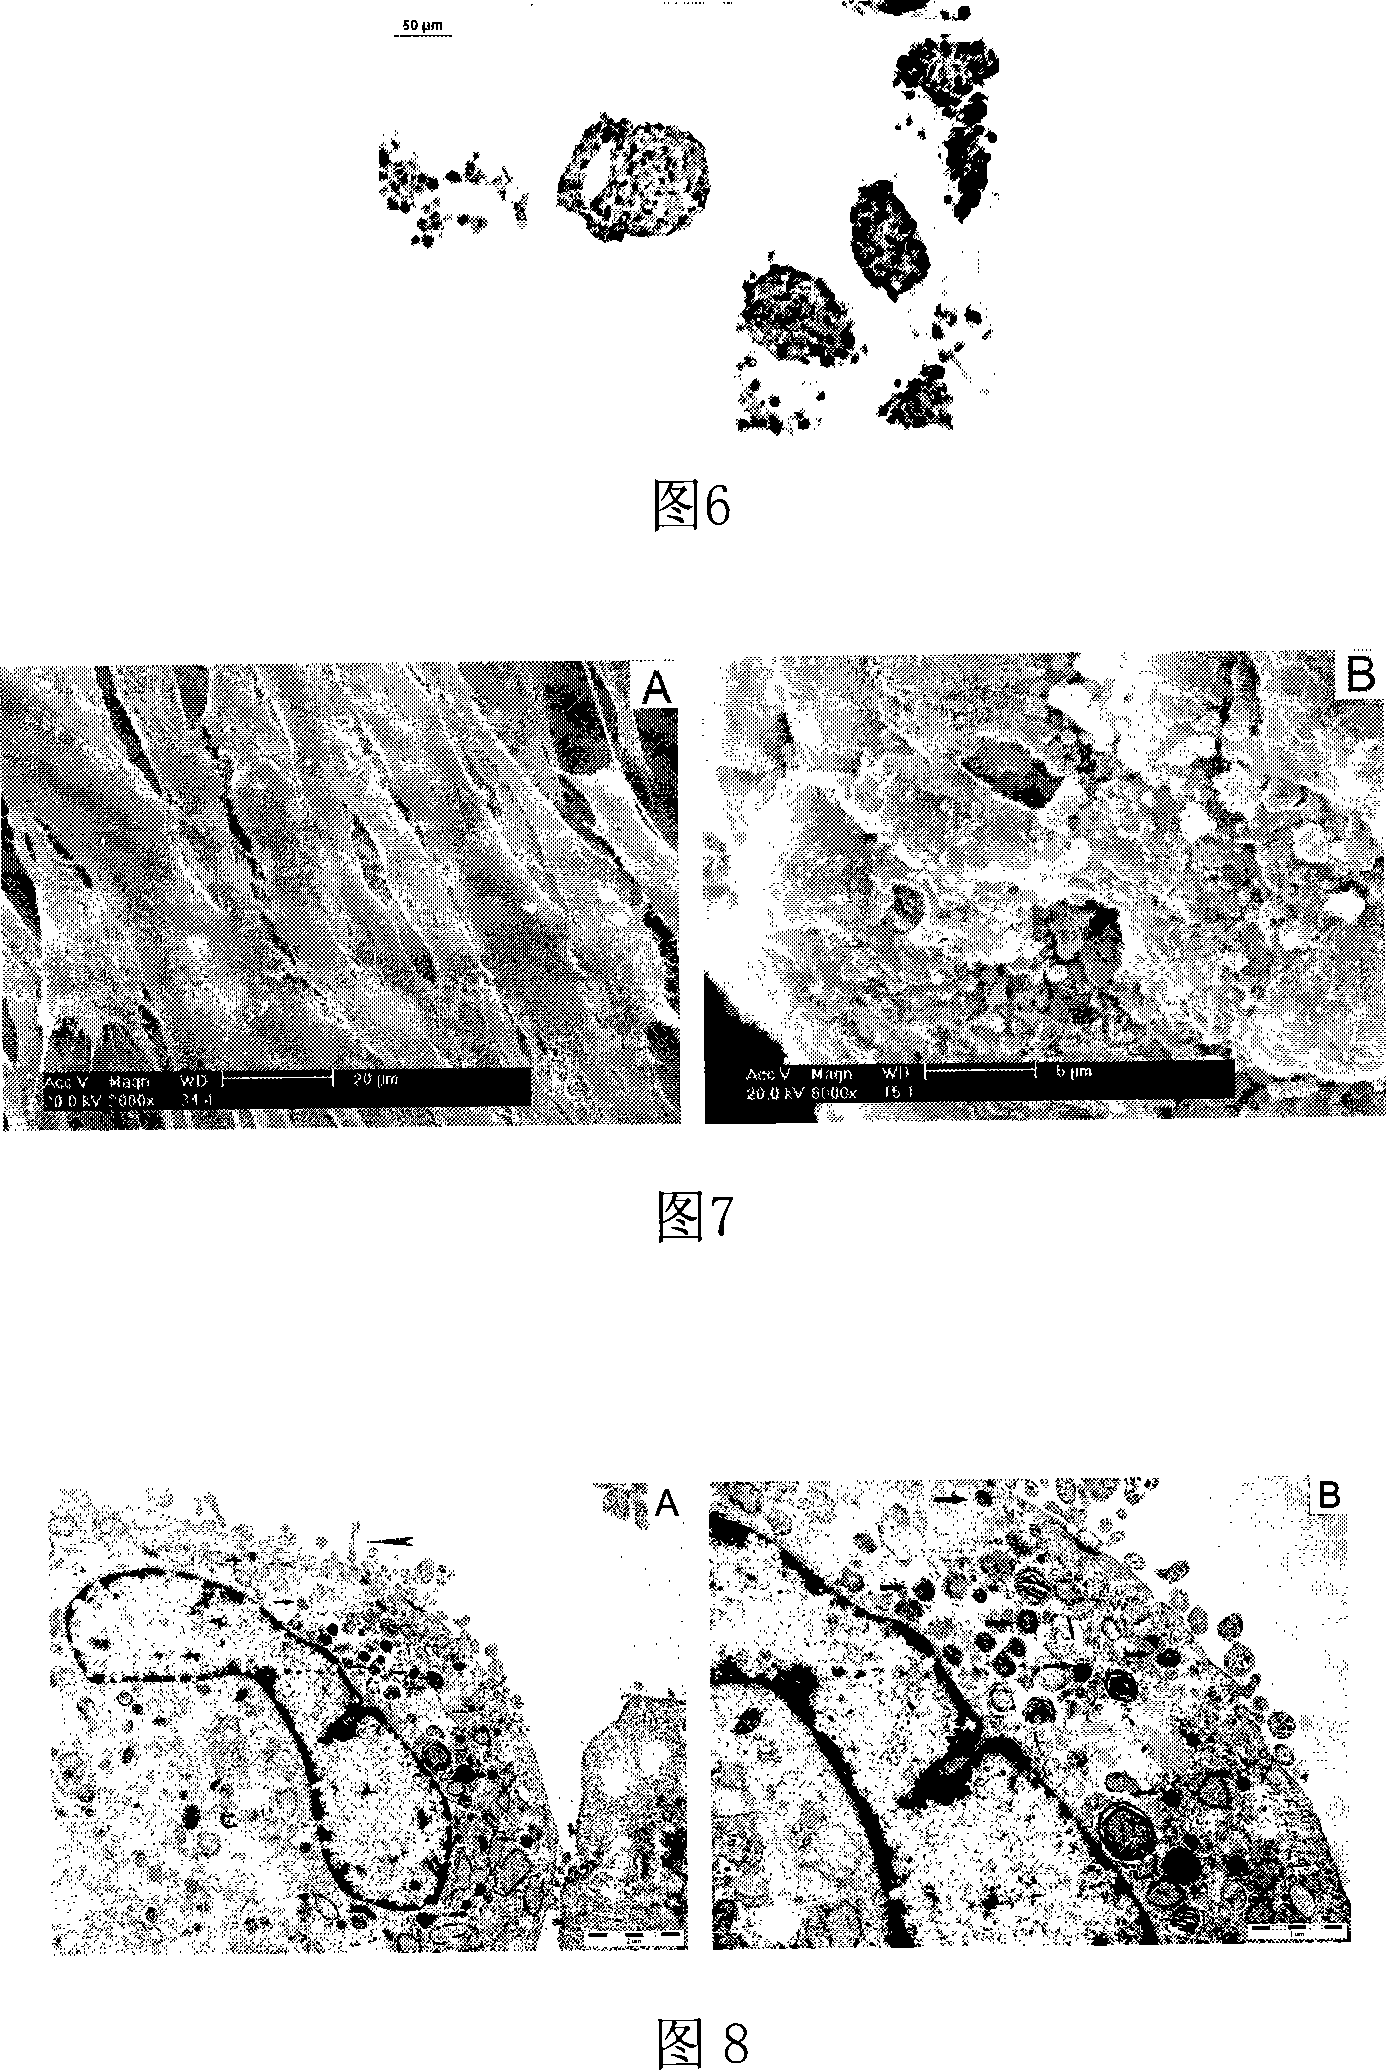 Method for inducing differentiation of human embryo mesenchymal stem cells into pancreatic islet beta-like cell